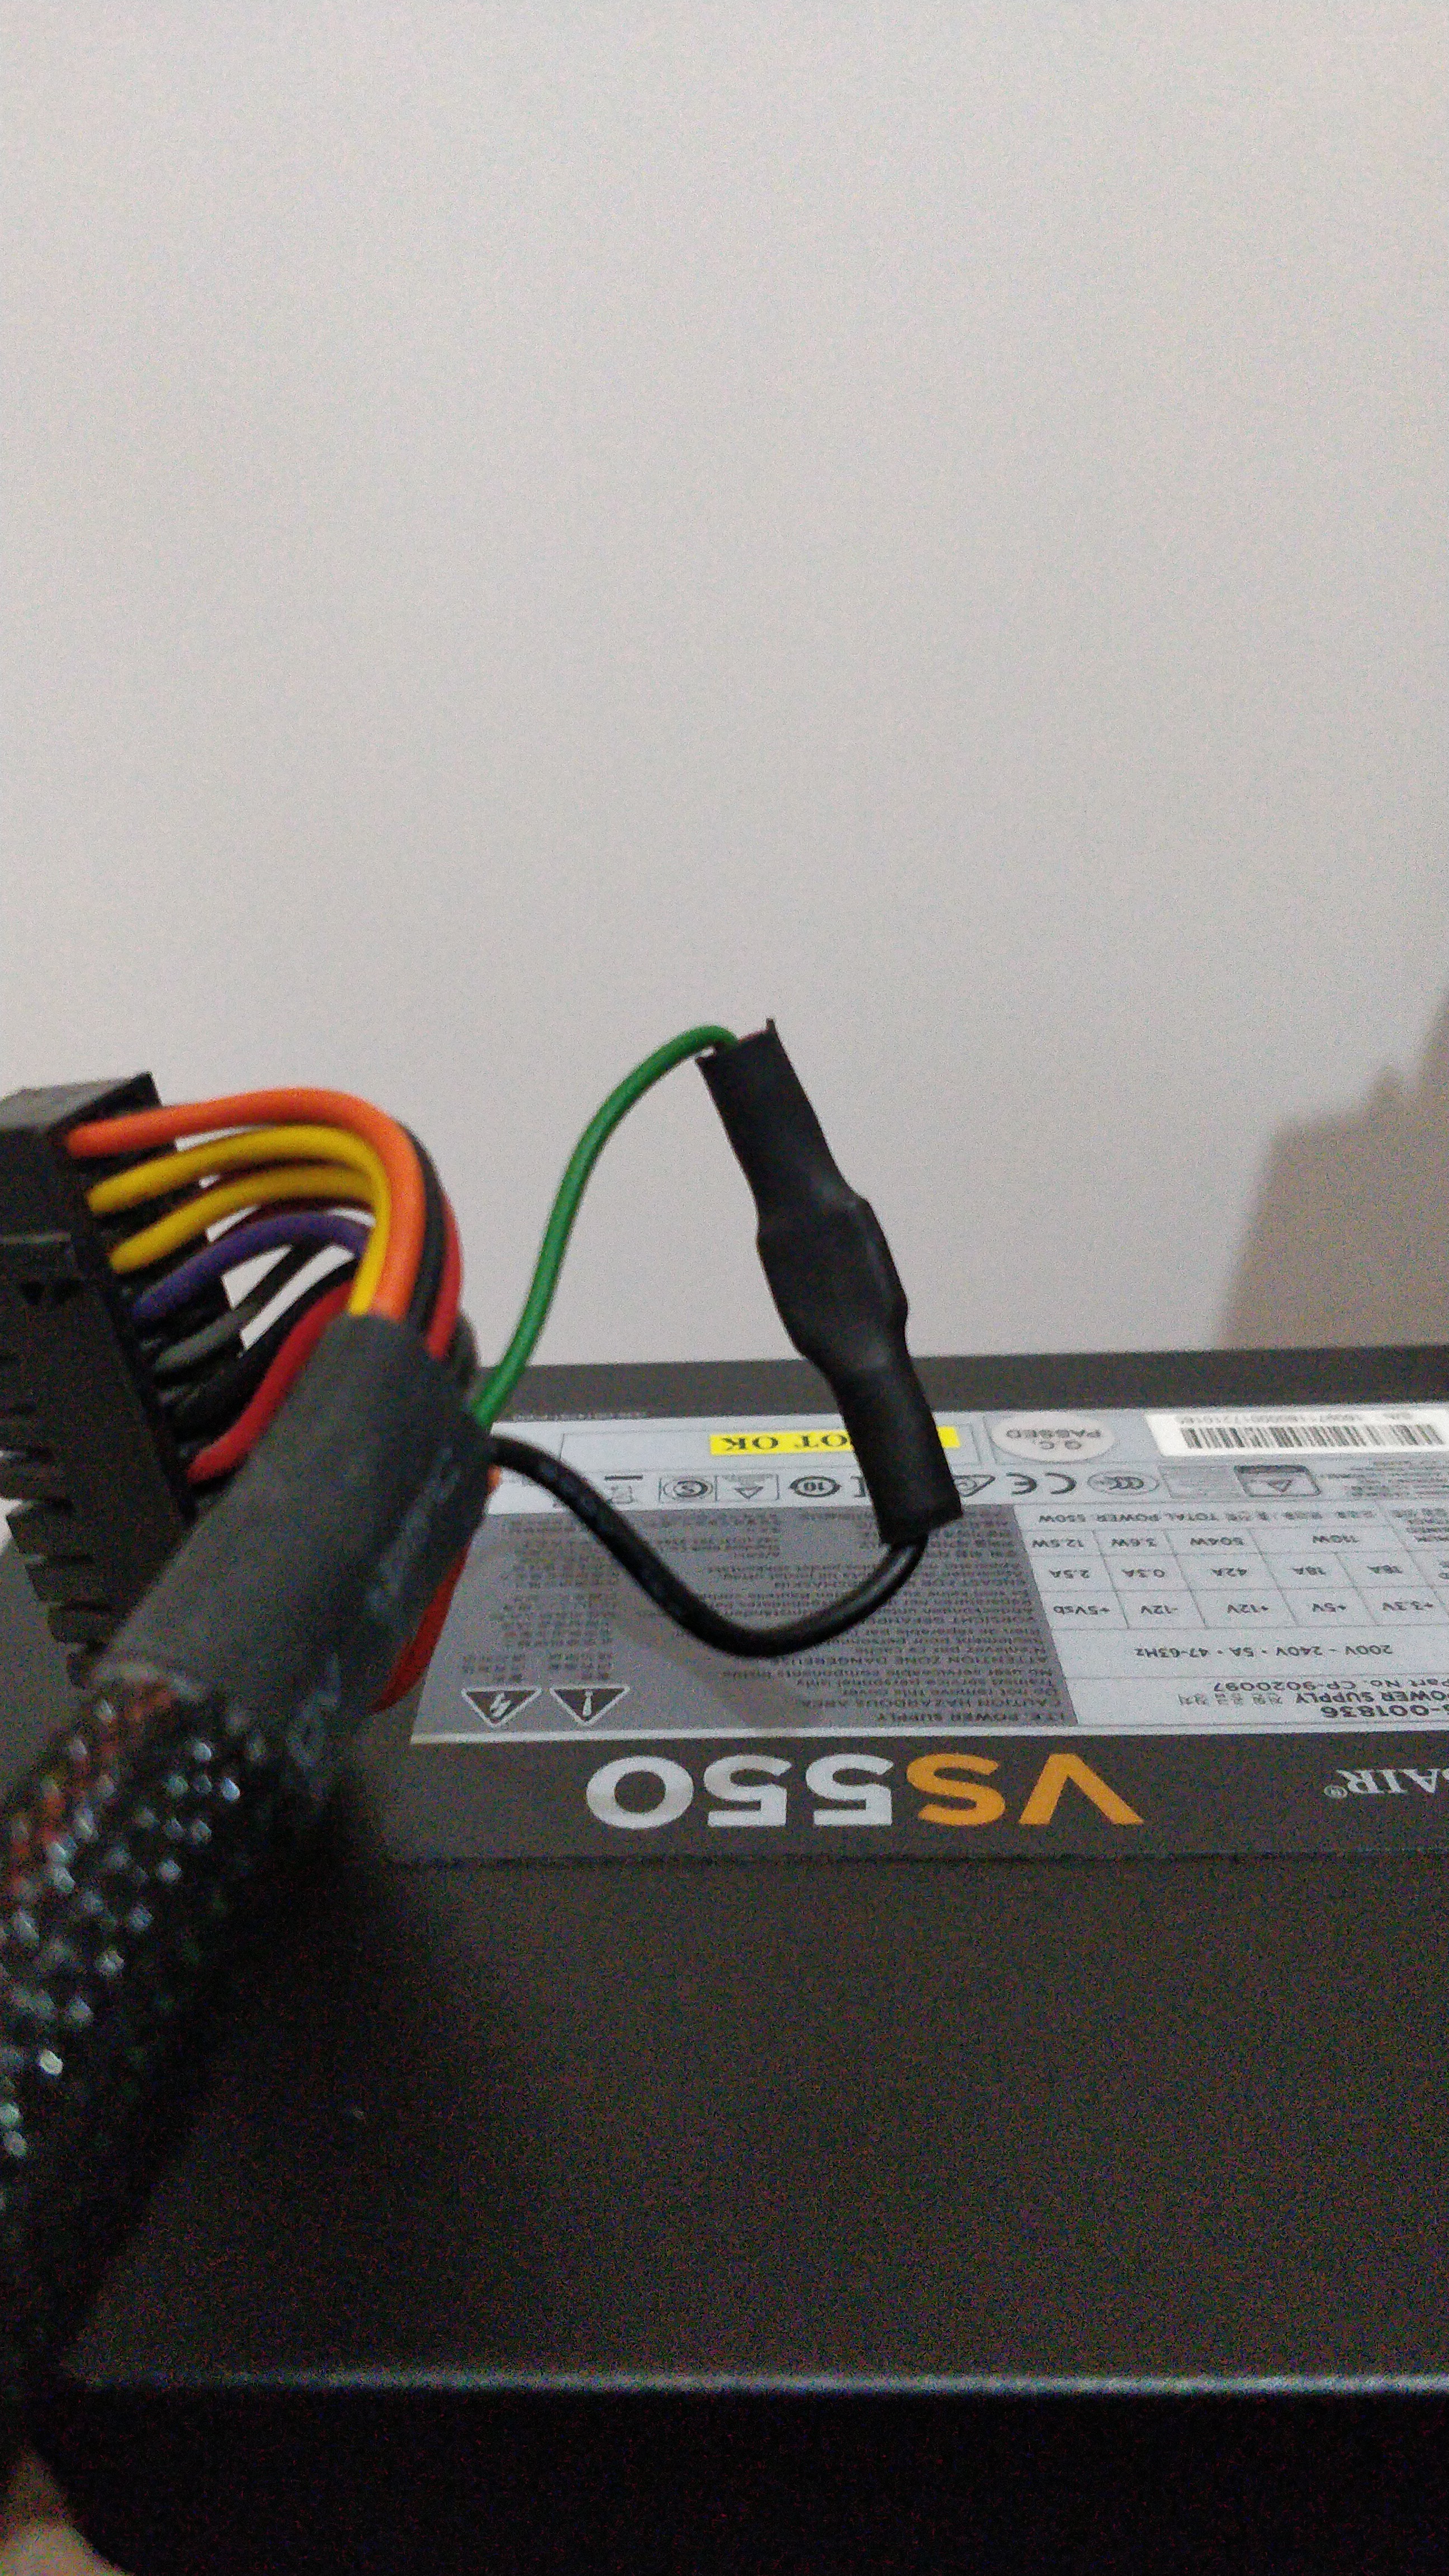 ATX power supply connection for Instant On